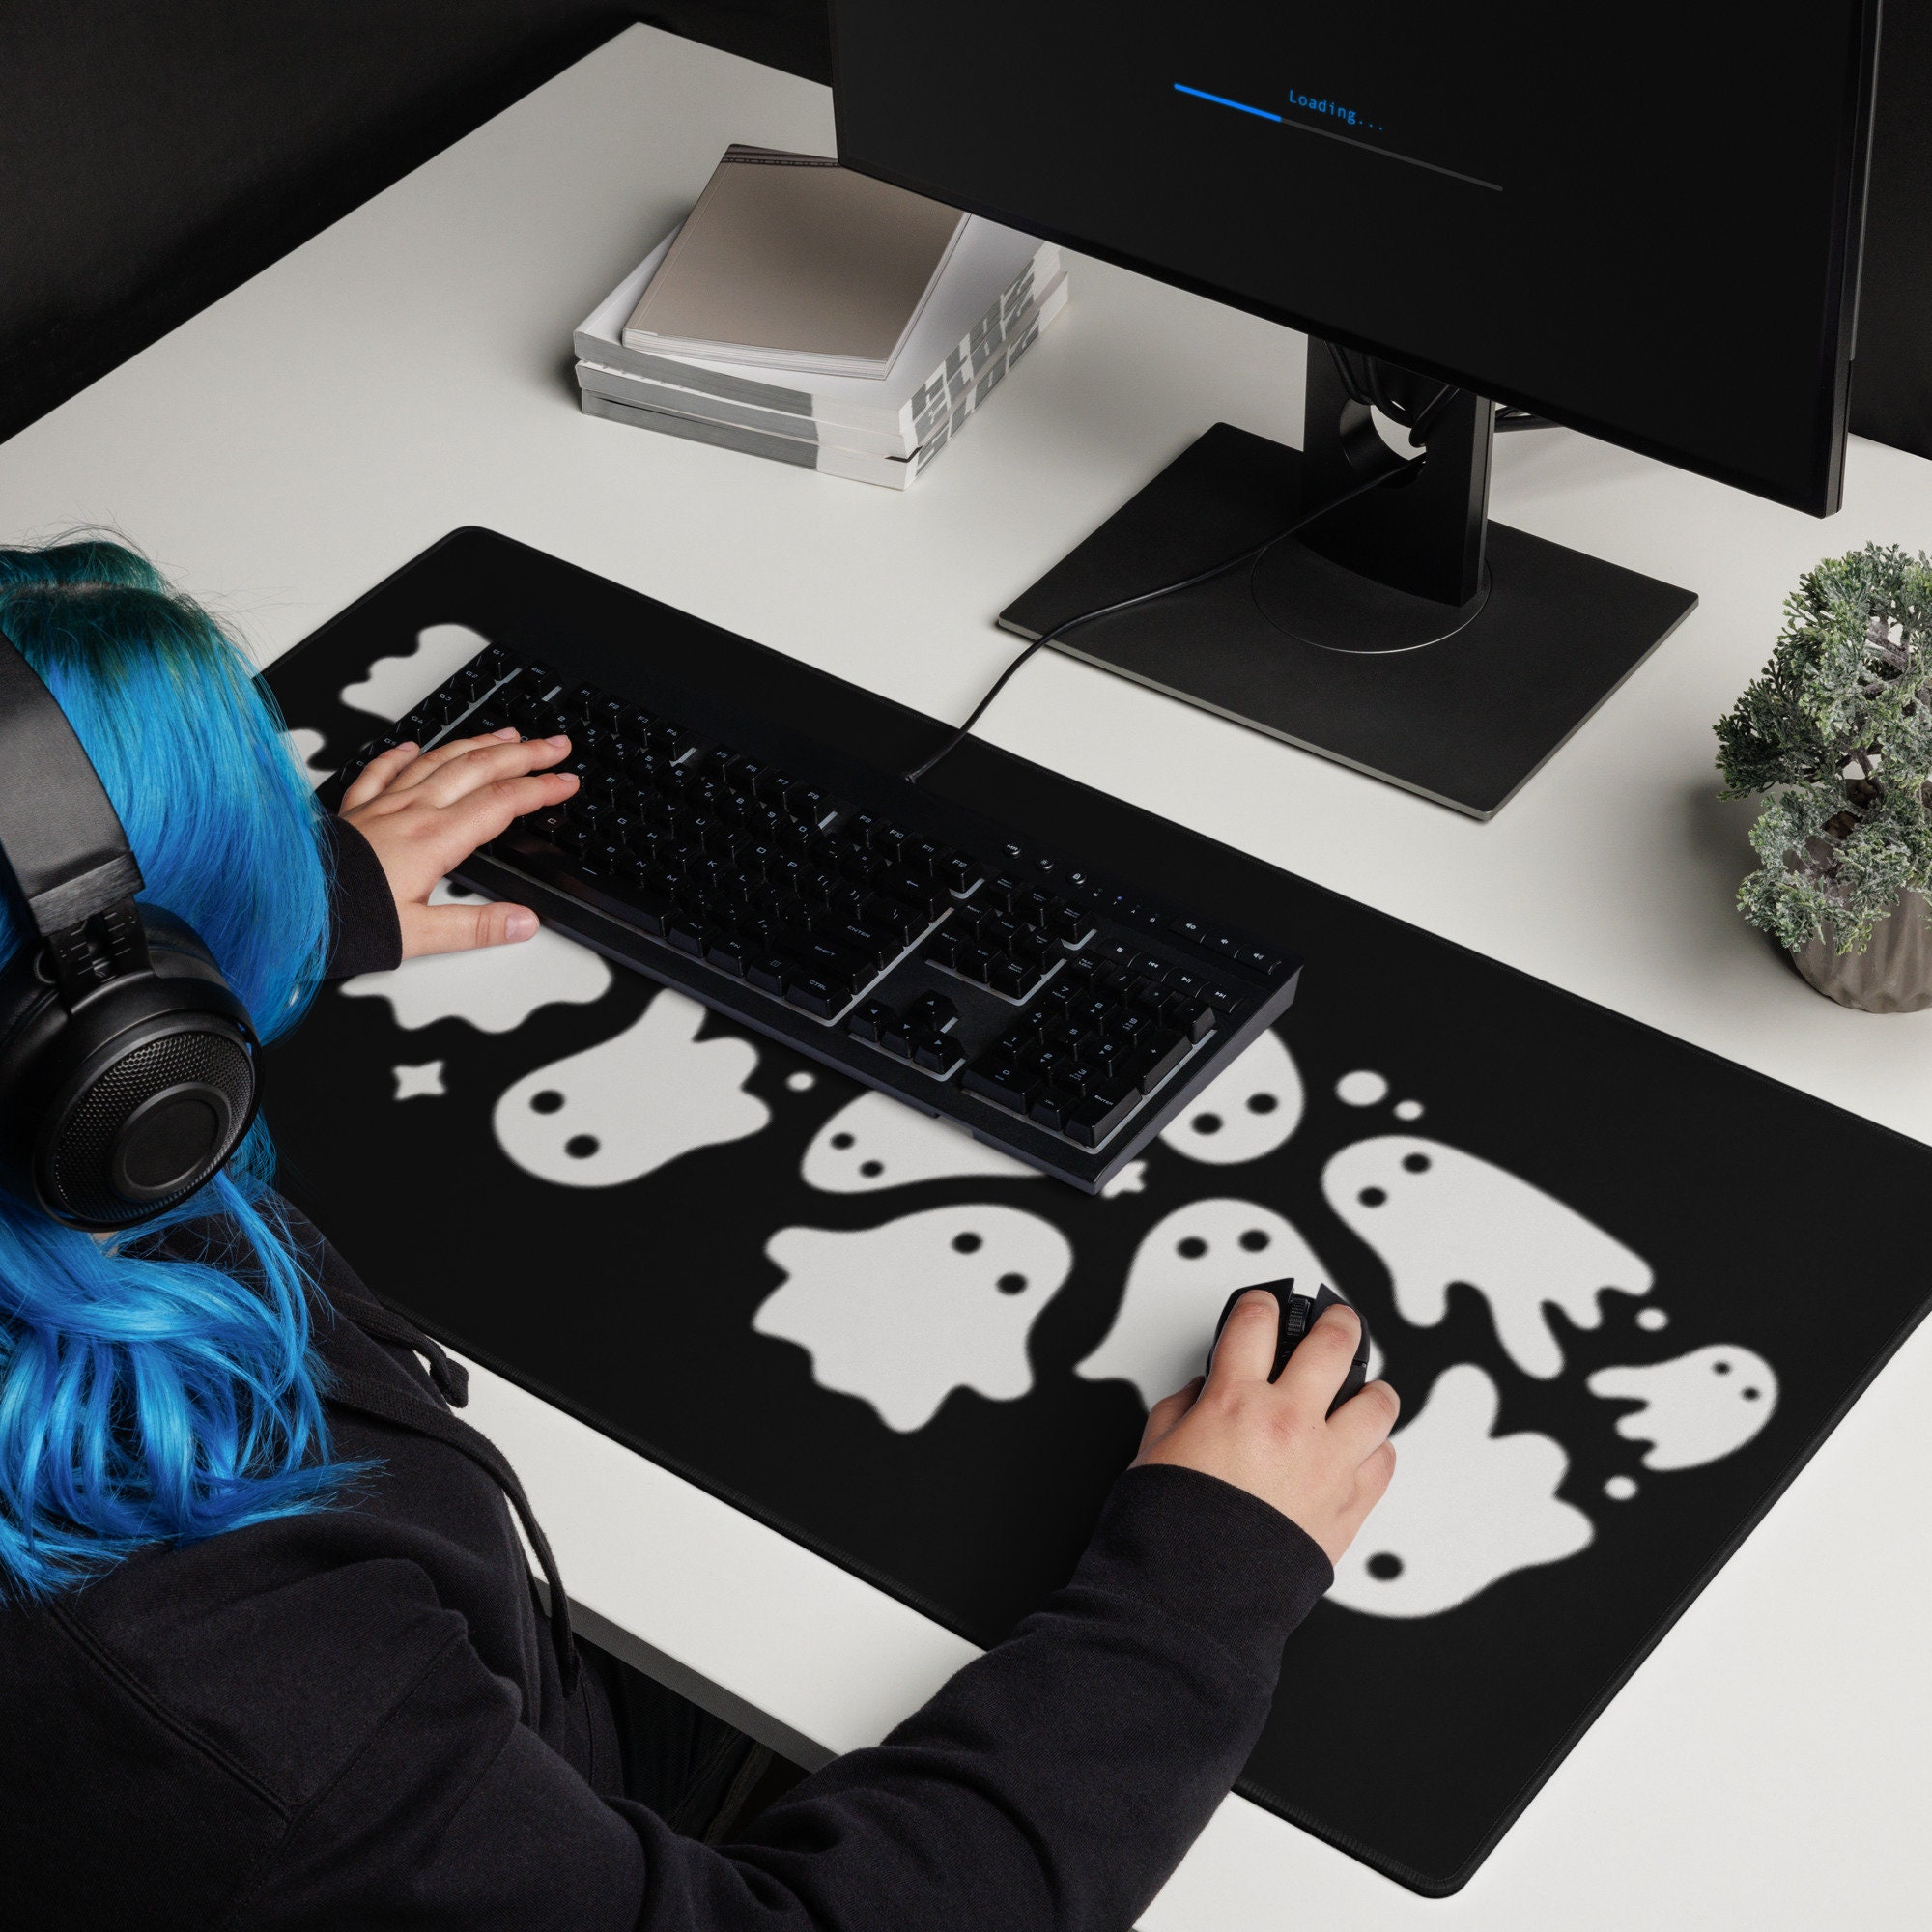 Simon Ghost Riley Mouse Pads & Desk Mats for Sale